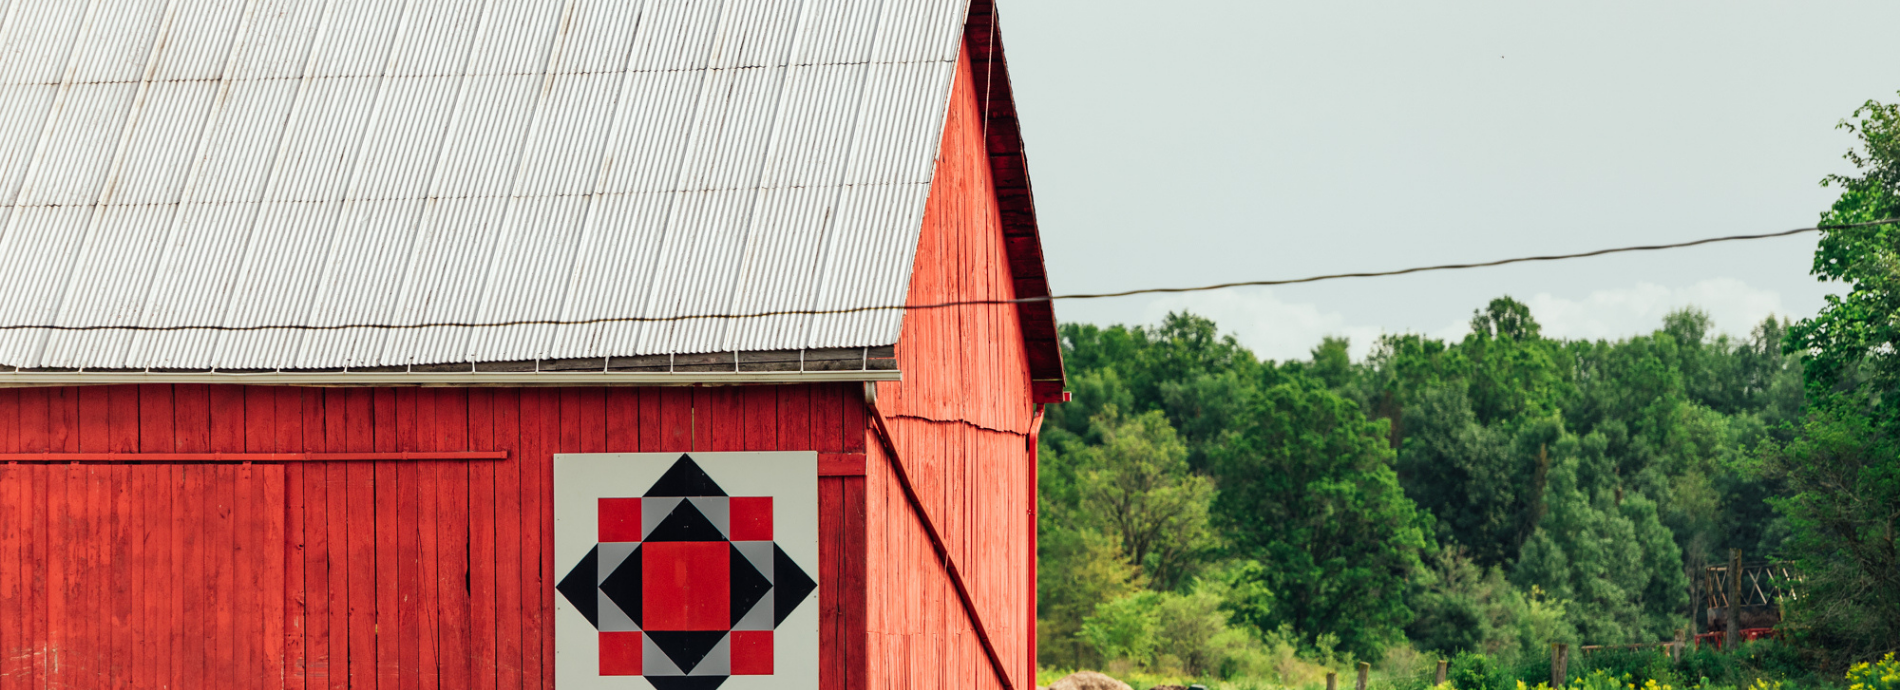 red barn in a rural area with a barn quilt